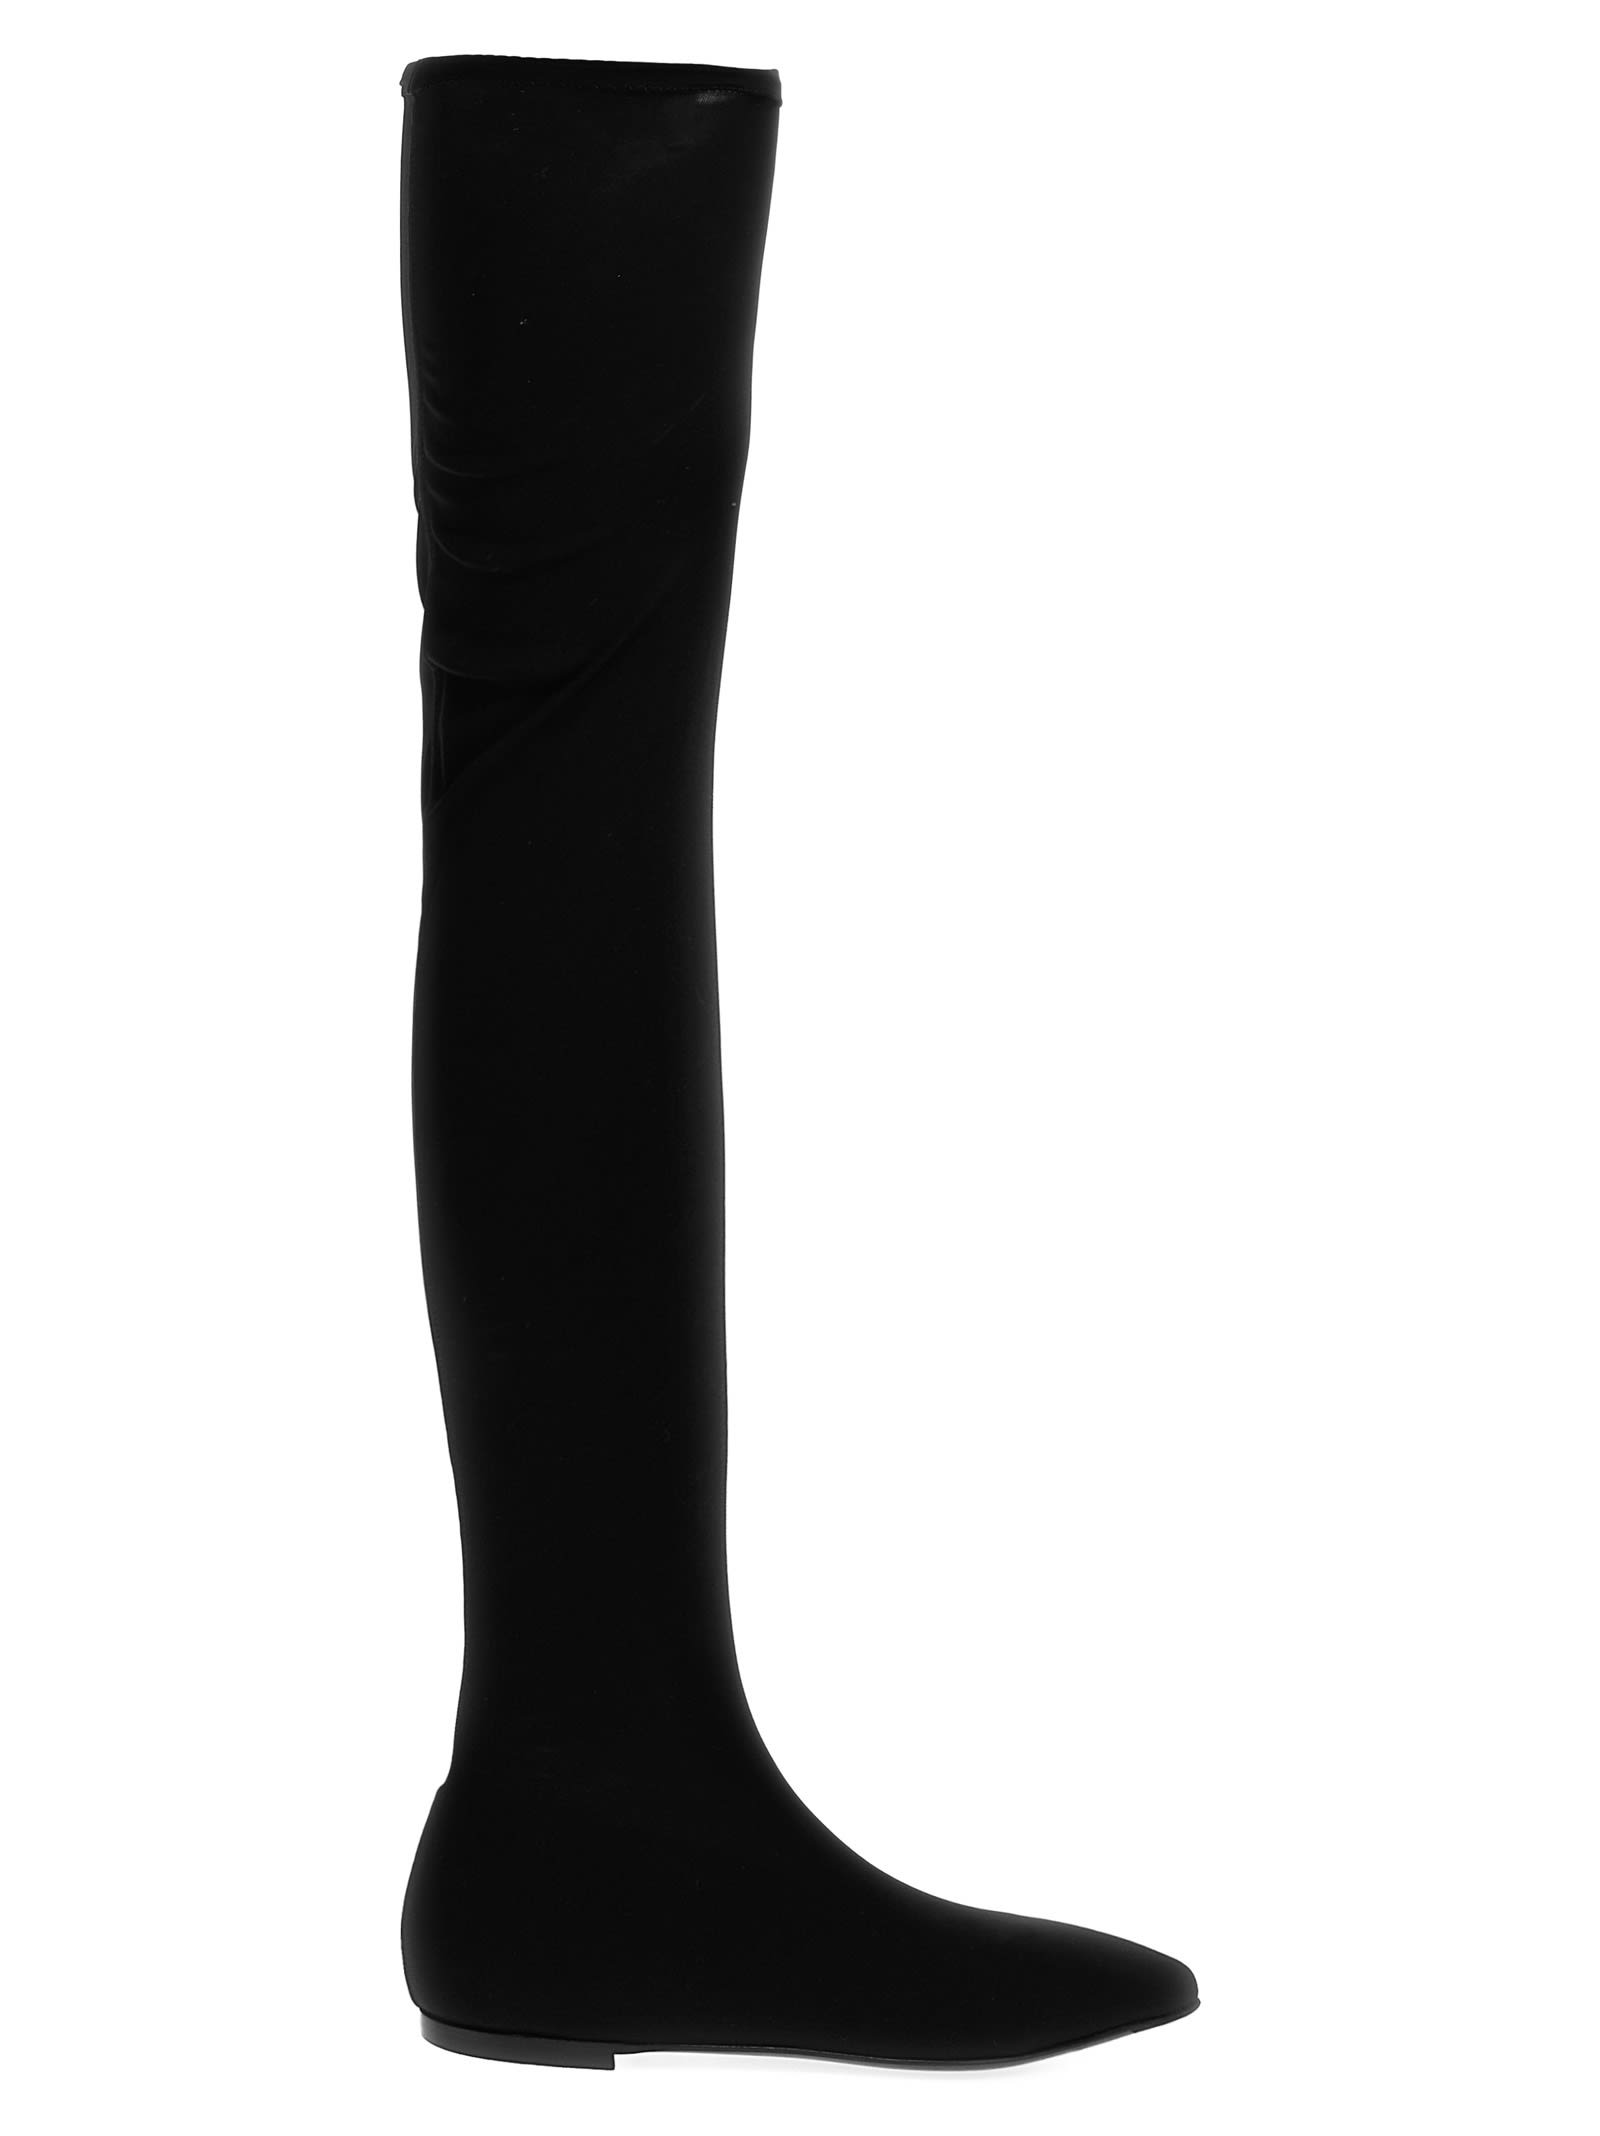 DOLCE & GABBANA OVER-THE-KNEE JERSEY BOOTS